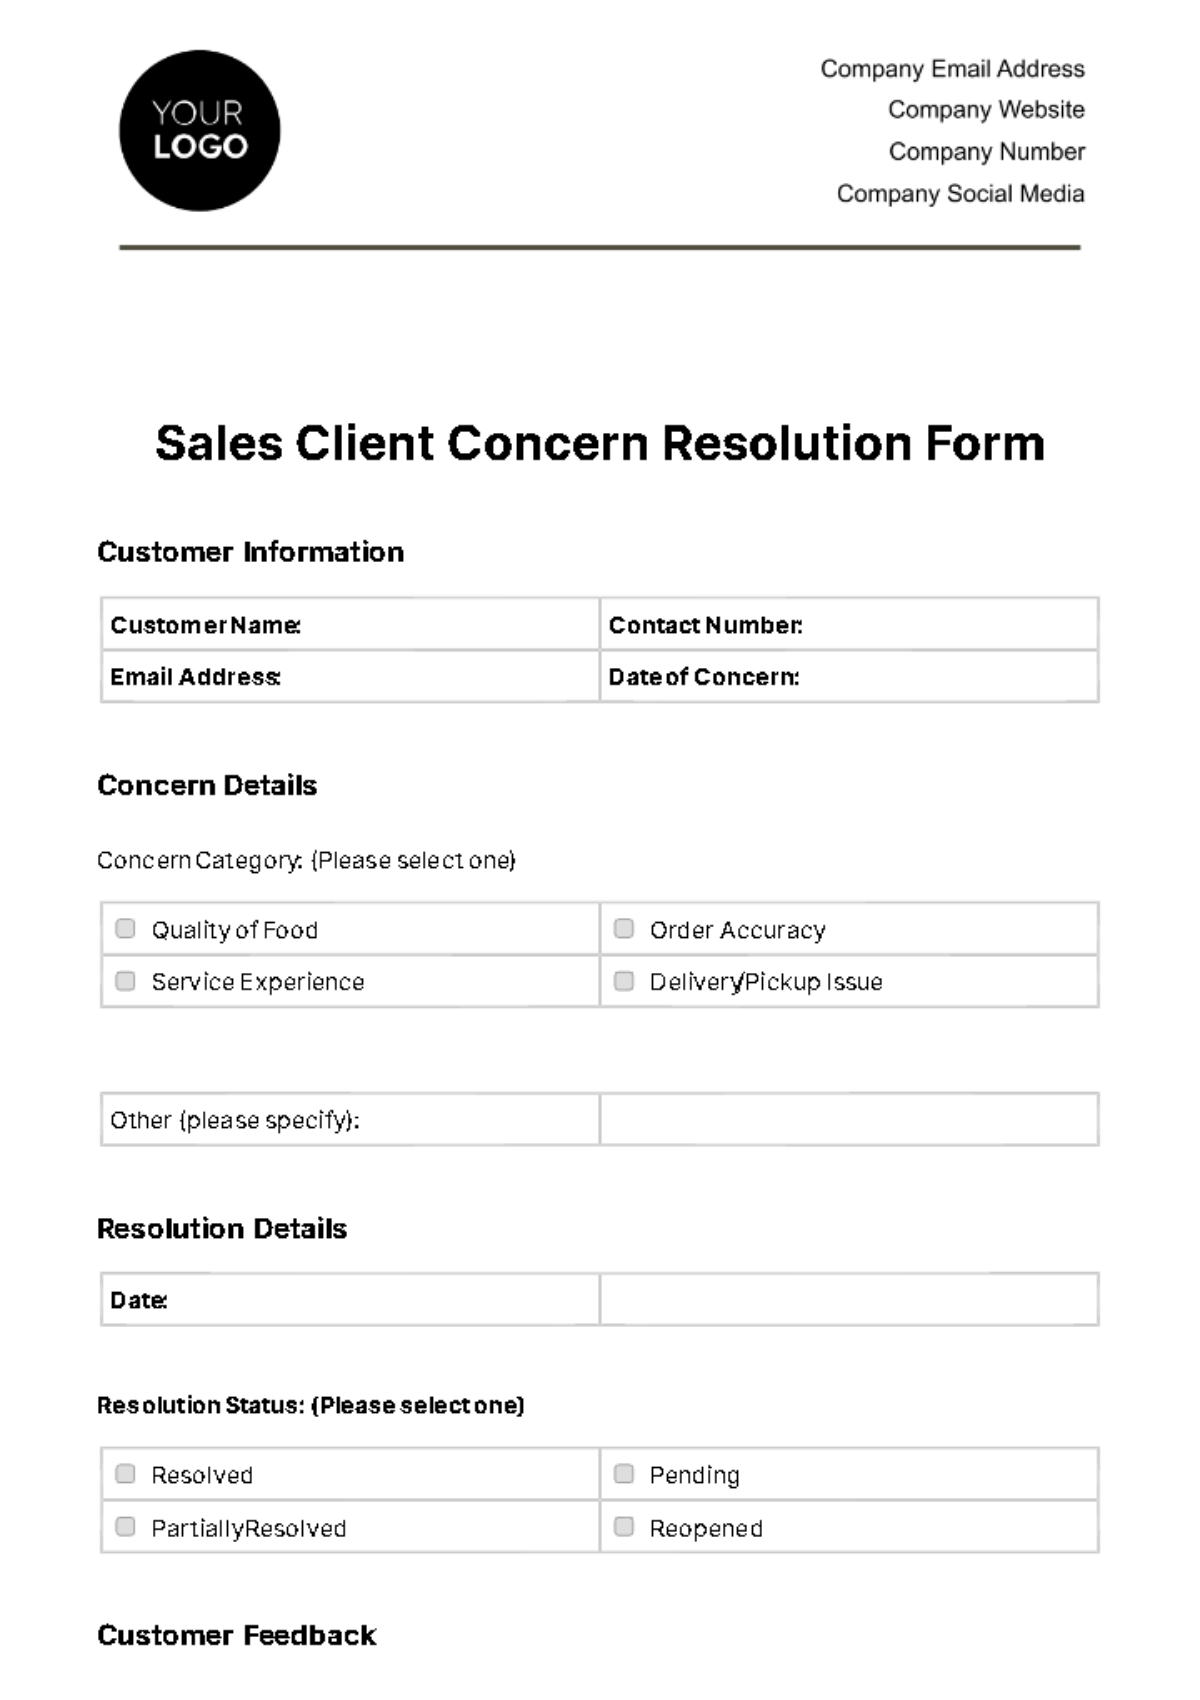 Free Sales Client Concern Resolution Form Template